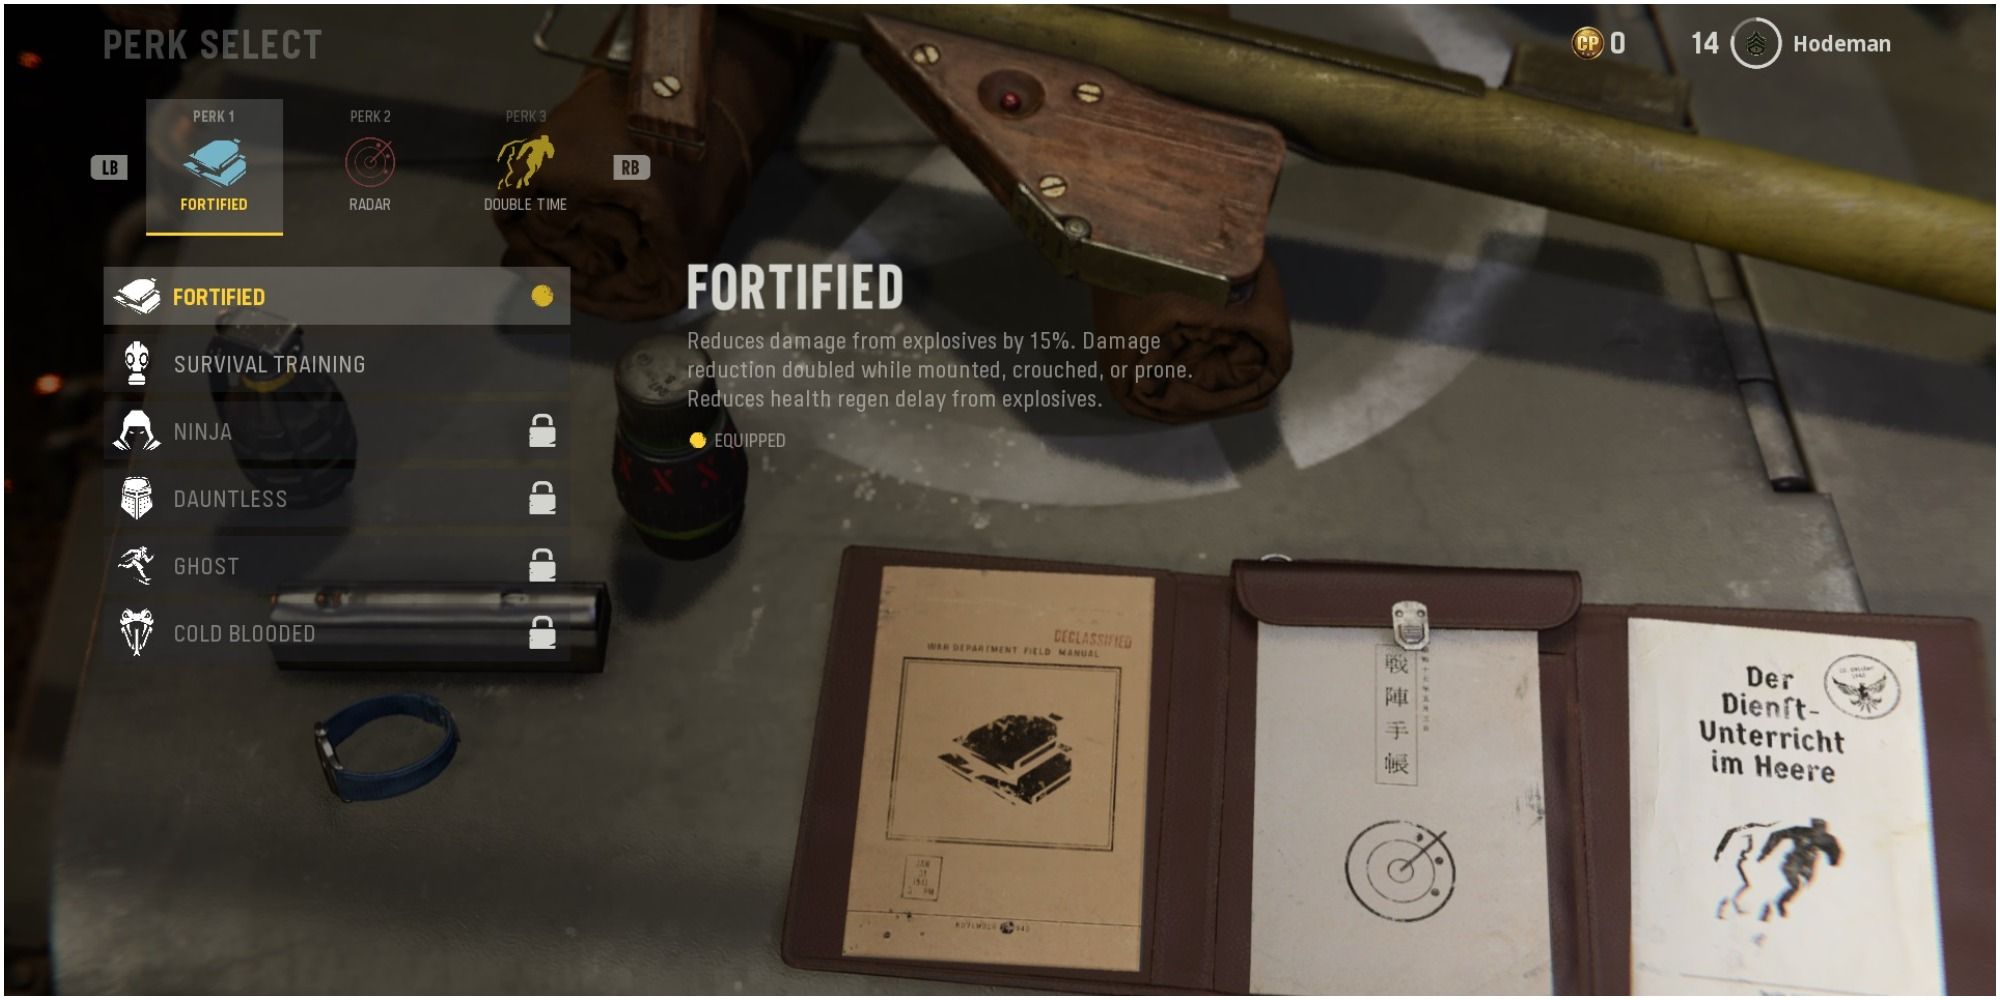 Call Of Duty Vanguard Description Of The Fortified Perk 1